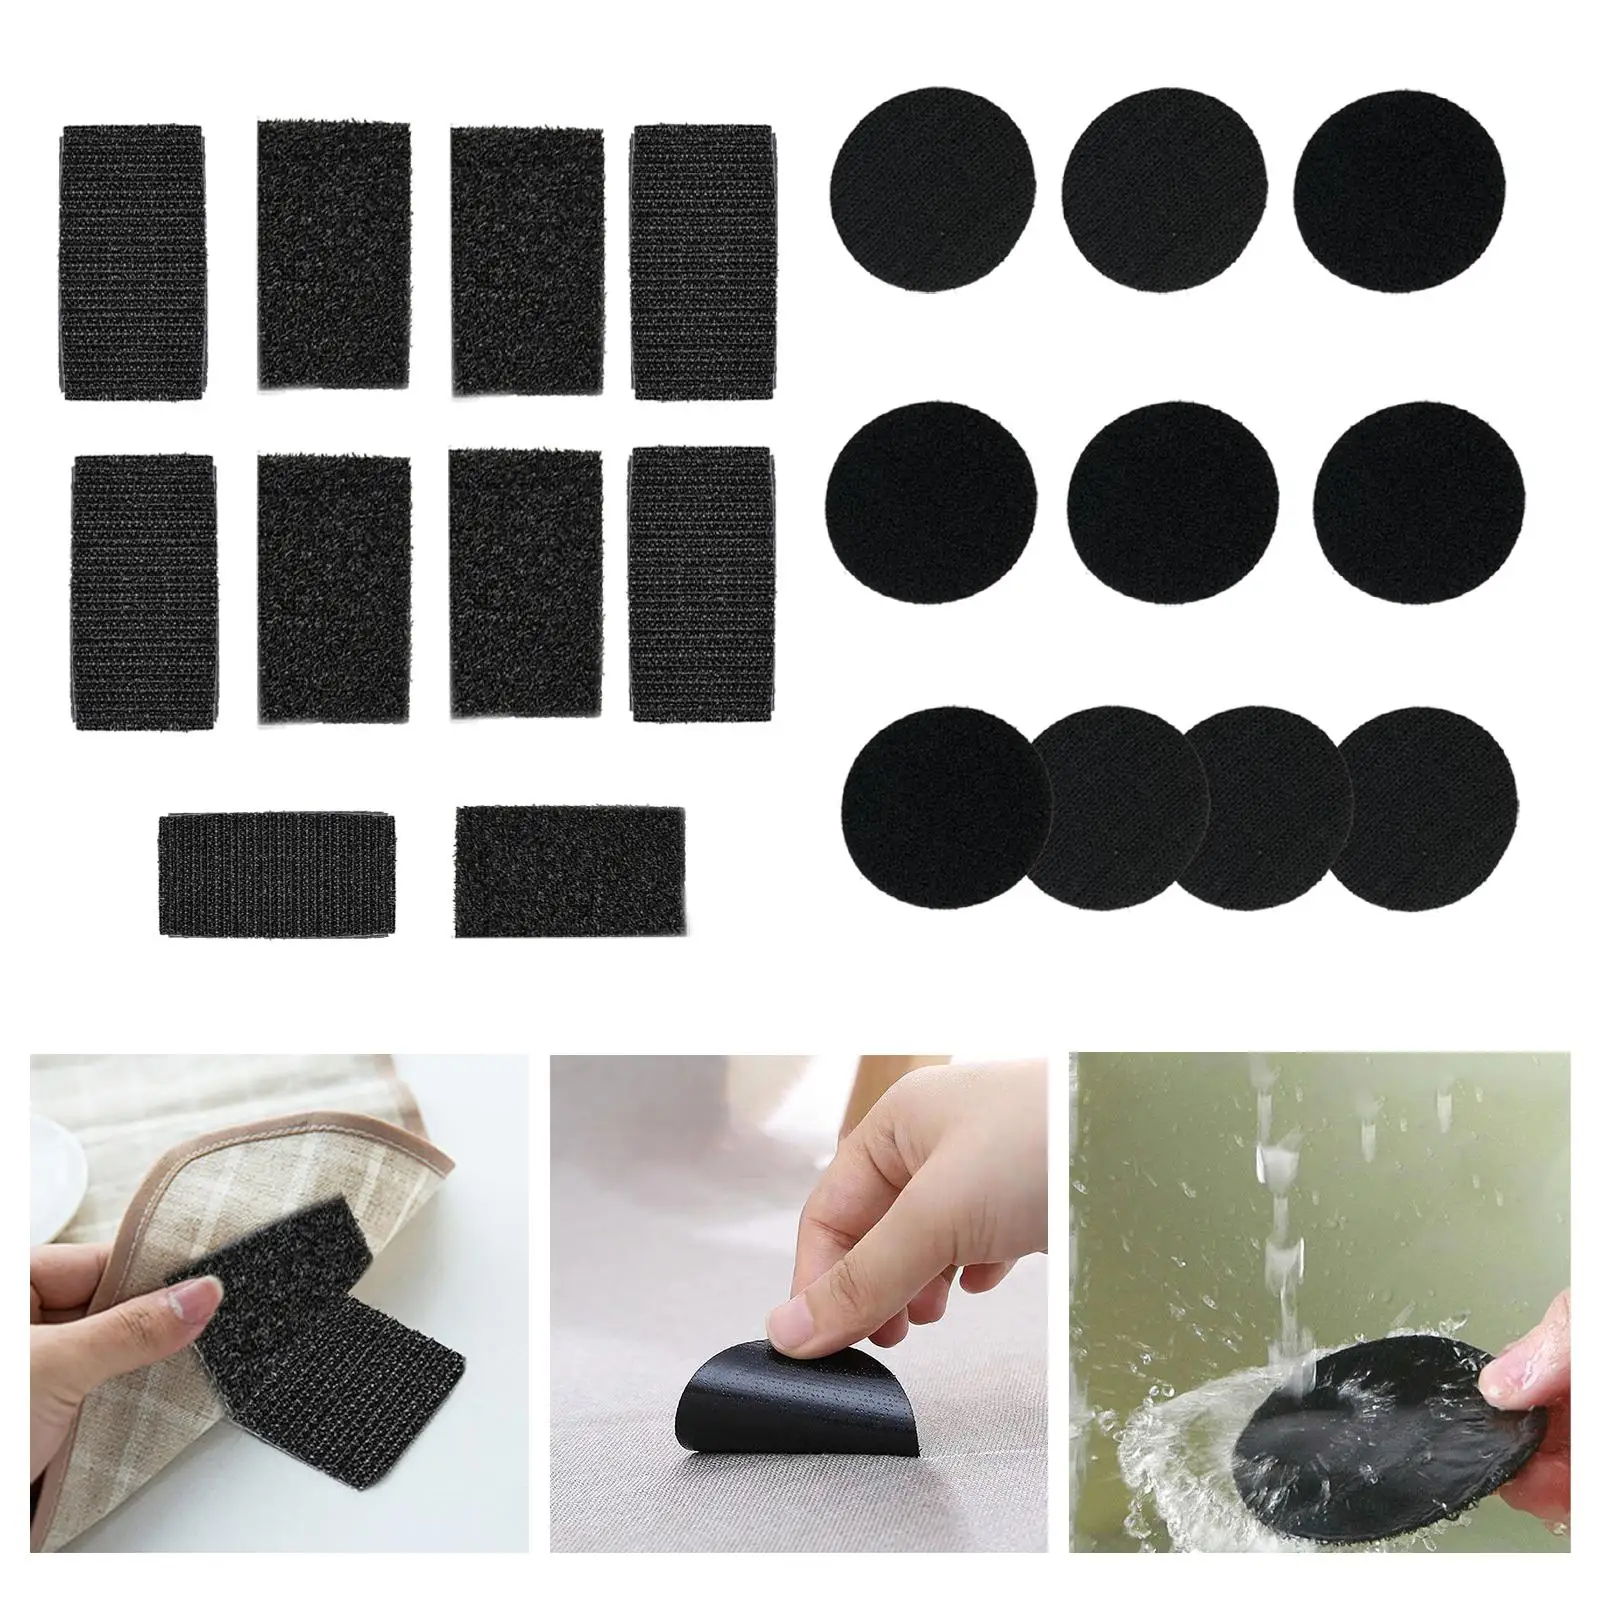 10x Pads Mounting Fastener Dots Reusable Invisible Removable for Bed Sheet Sofa Cushion Sofa Mat Household Carpet Dormitory